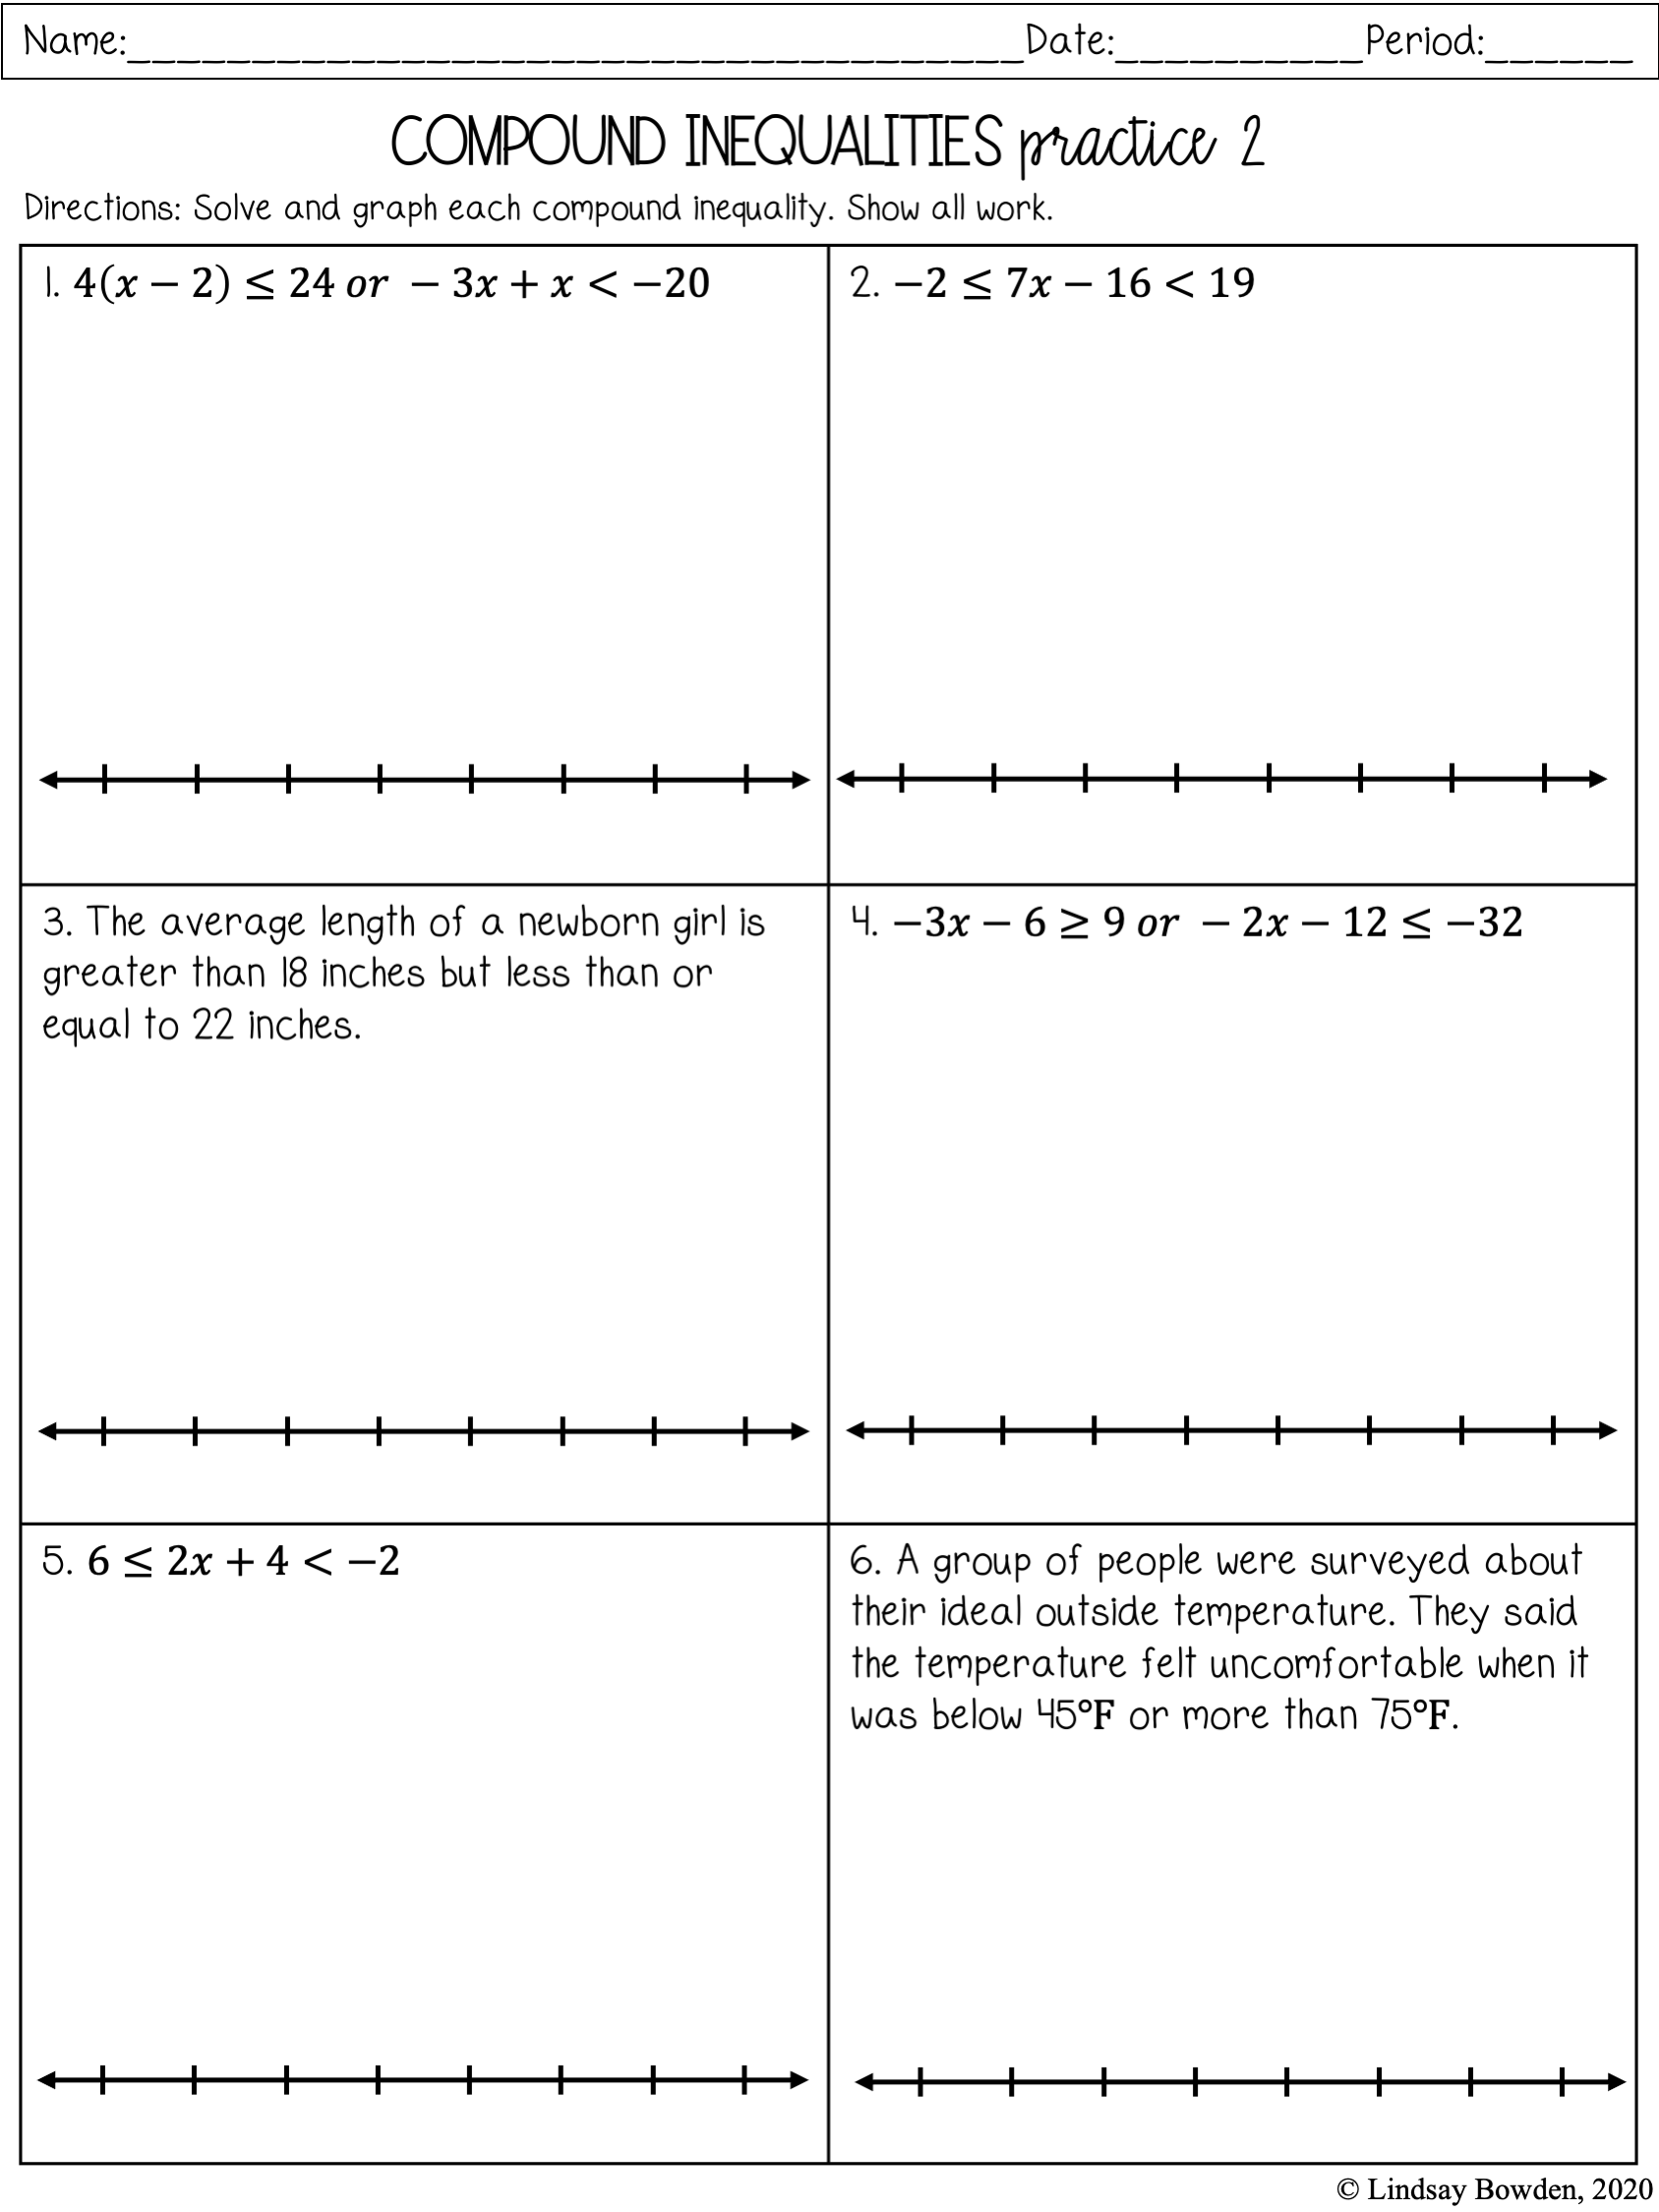 Compound Inequalities Notes and Worksheets - Lindsay Bowden In Solving Compound Inequalities Worksheet